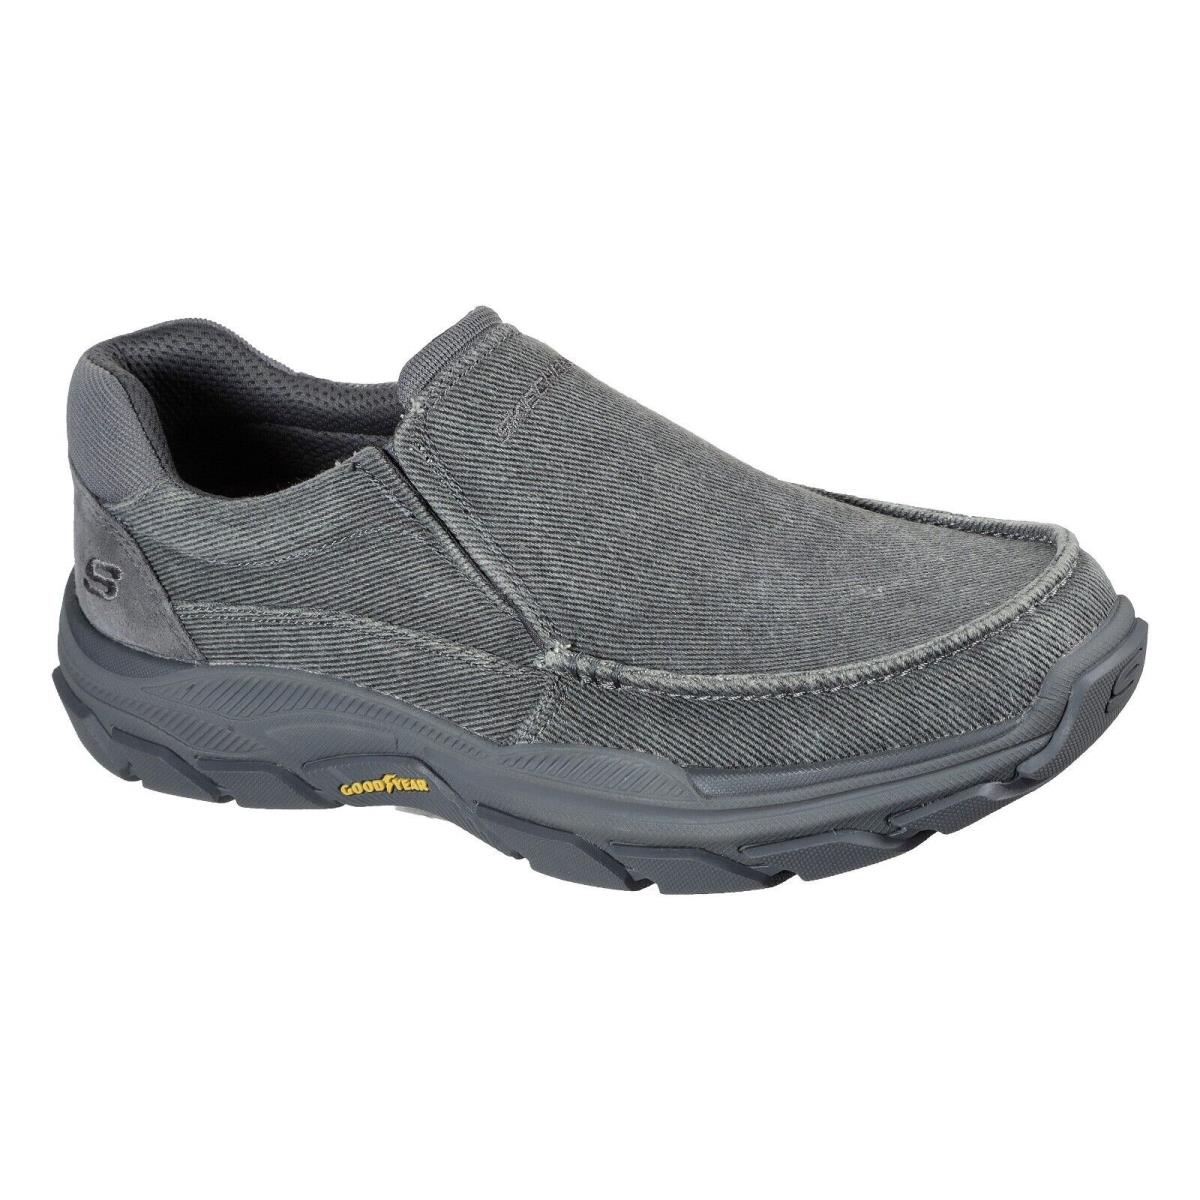 Men`s Skechers Respected Vergo Casual Shoes 204331 /char Multi Sizes Charcoal - 